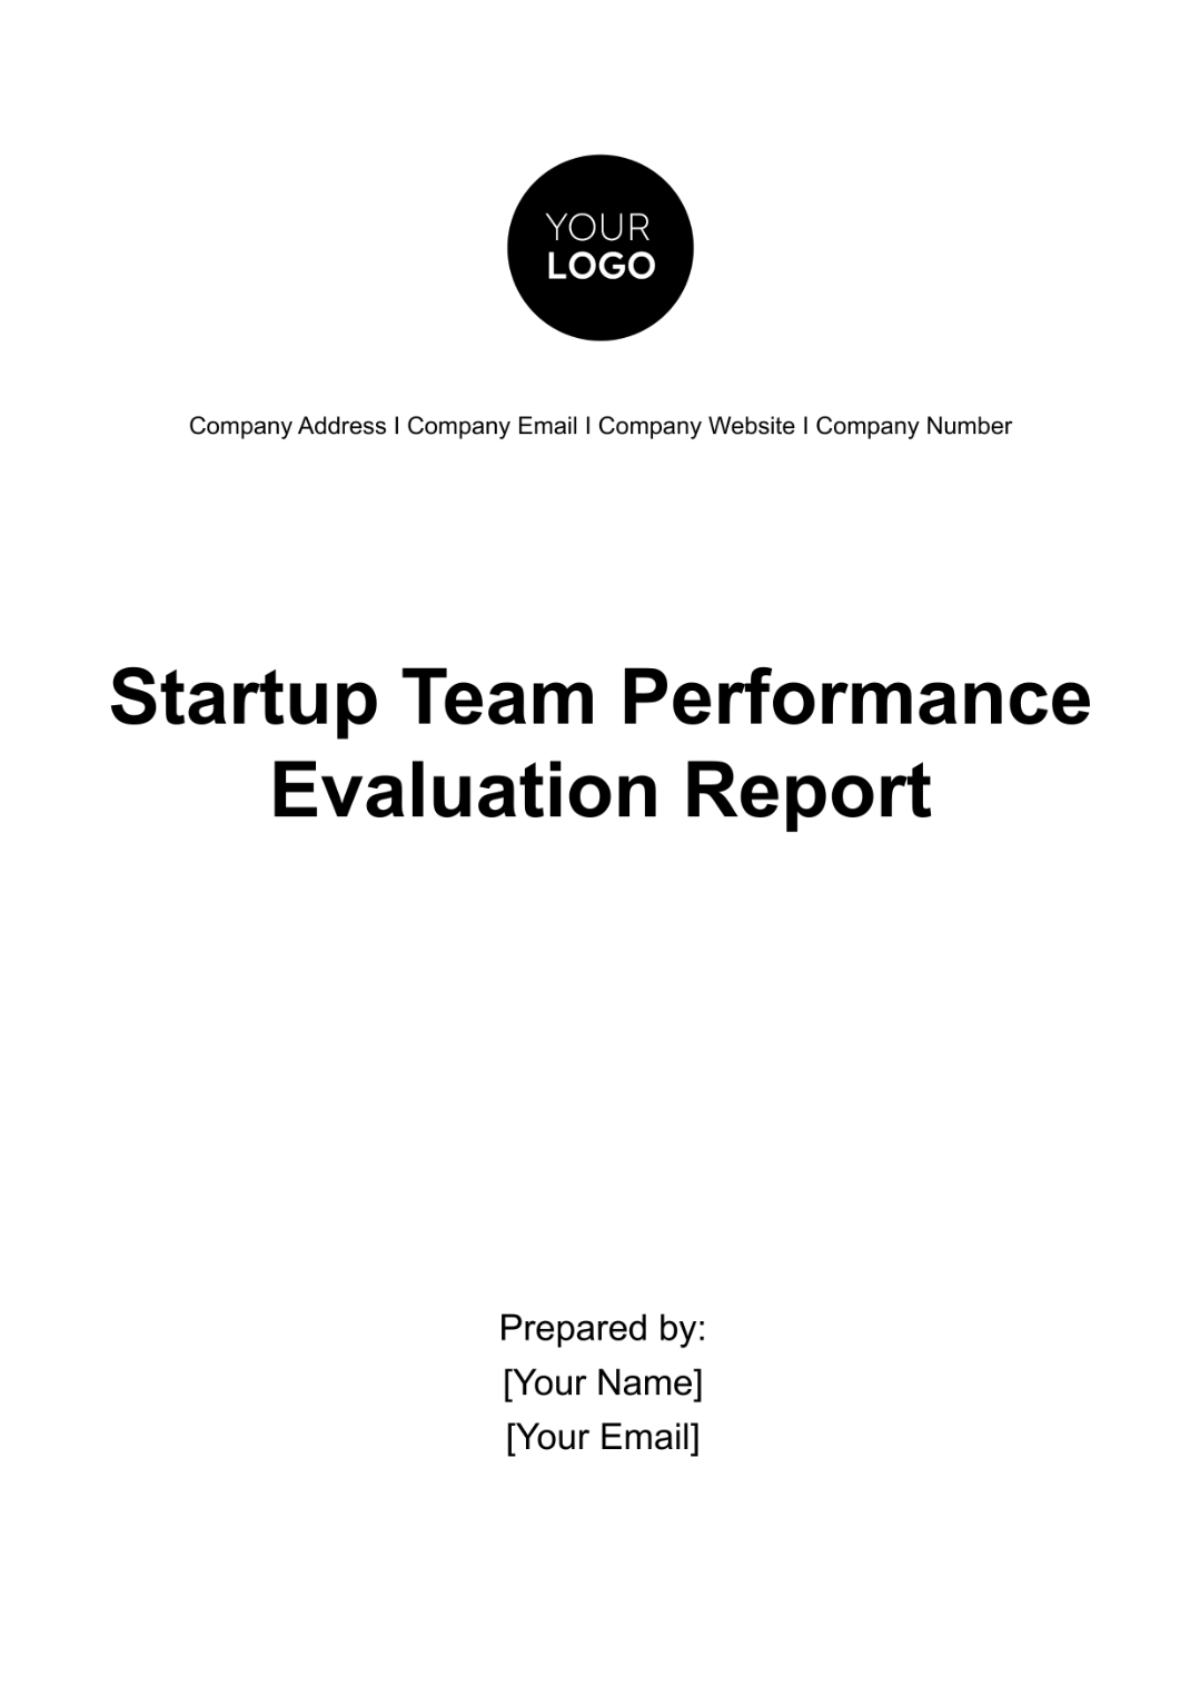 Startup Team Performance Evaluation Report Template